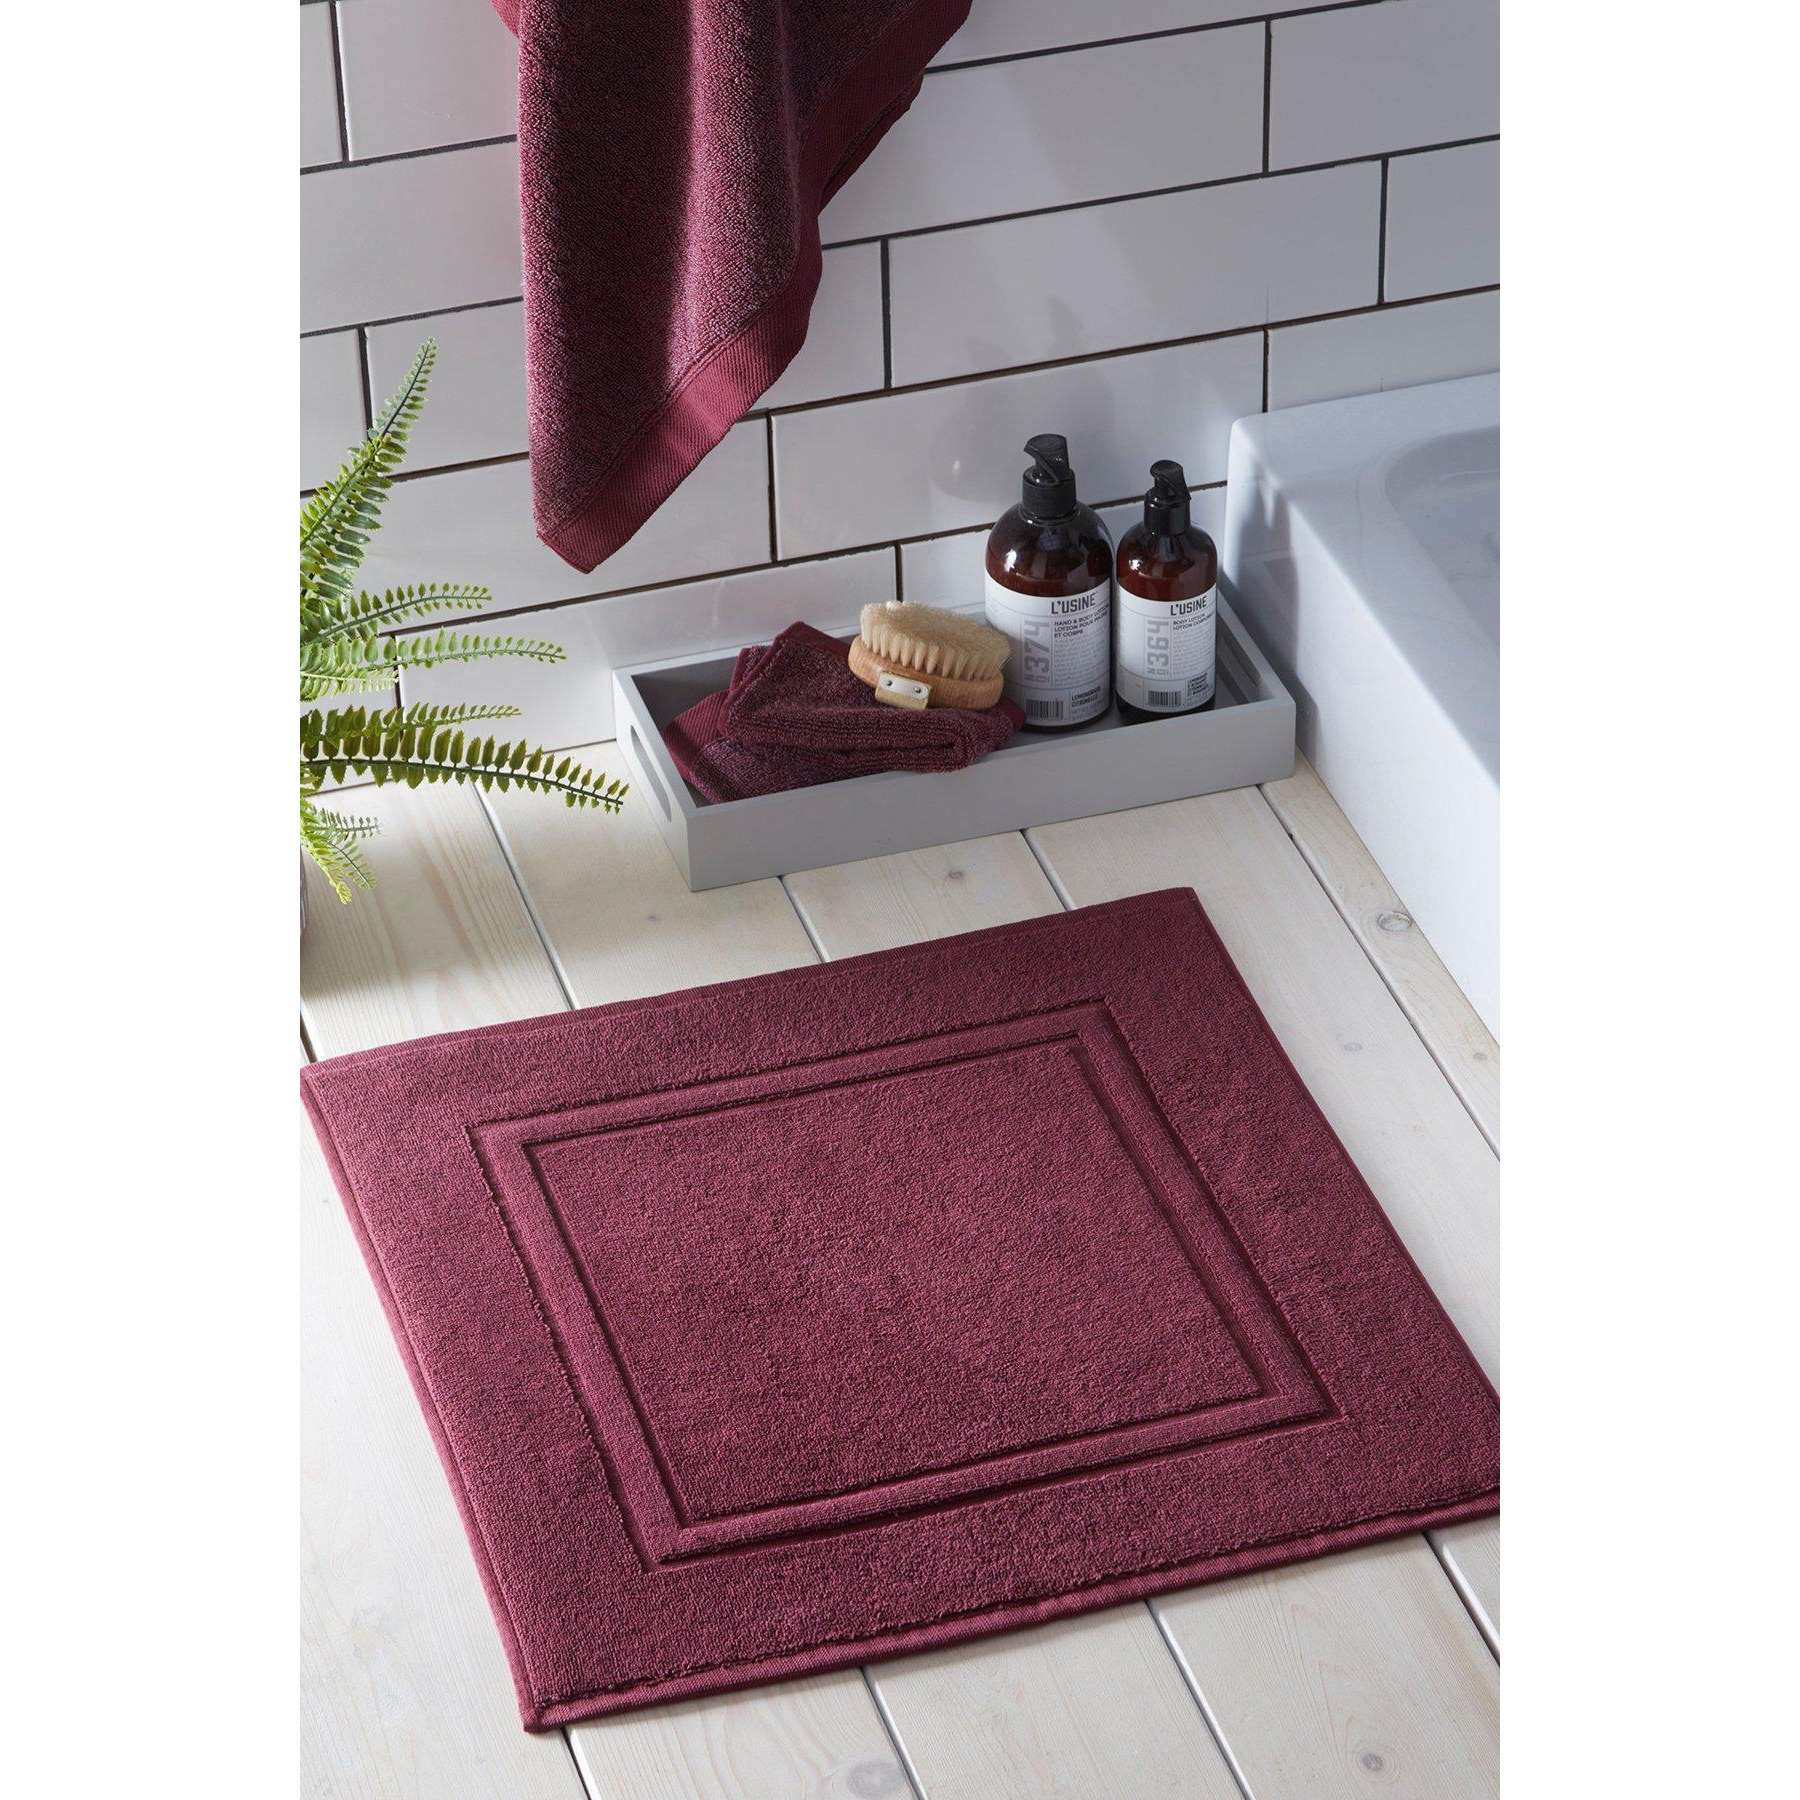 'Abode Eco' Soft Sustainable Heavyweight BCI Cotton Shower Mat - image 1